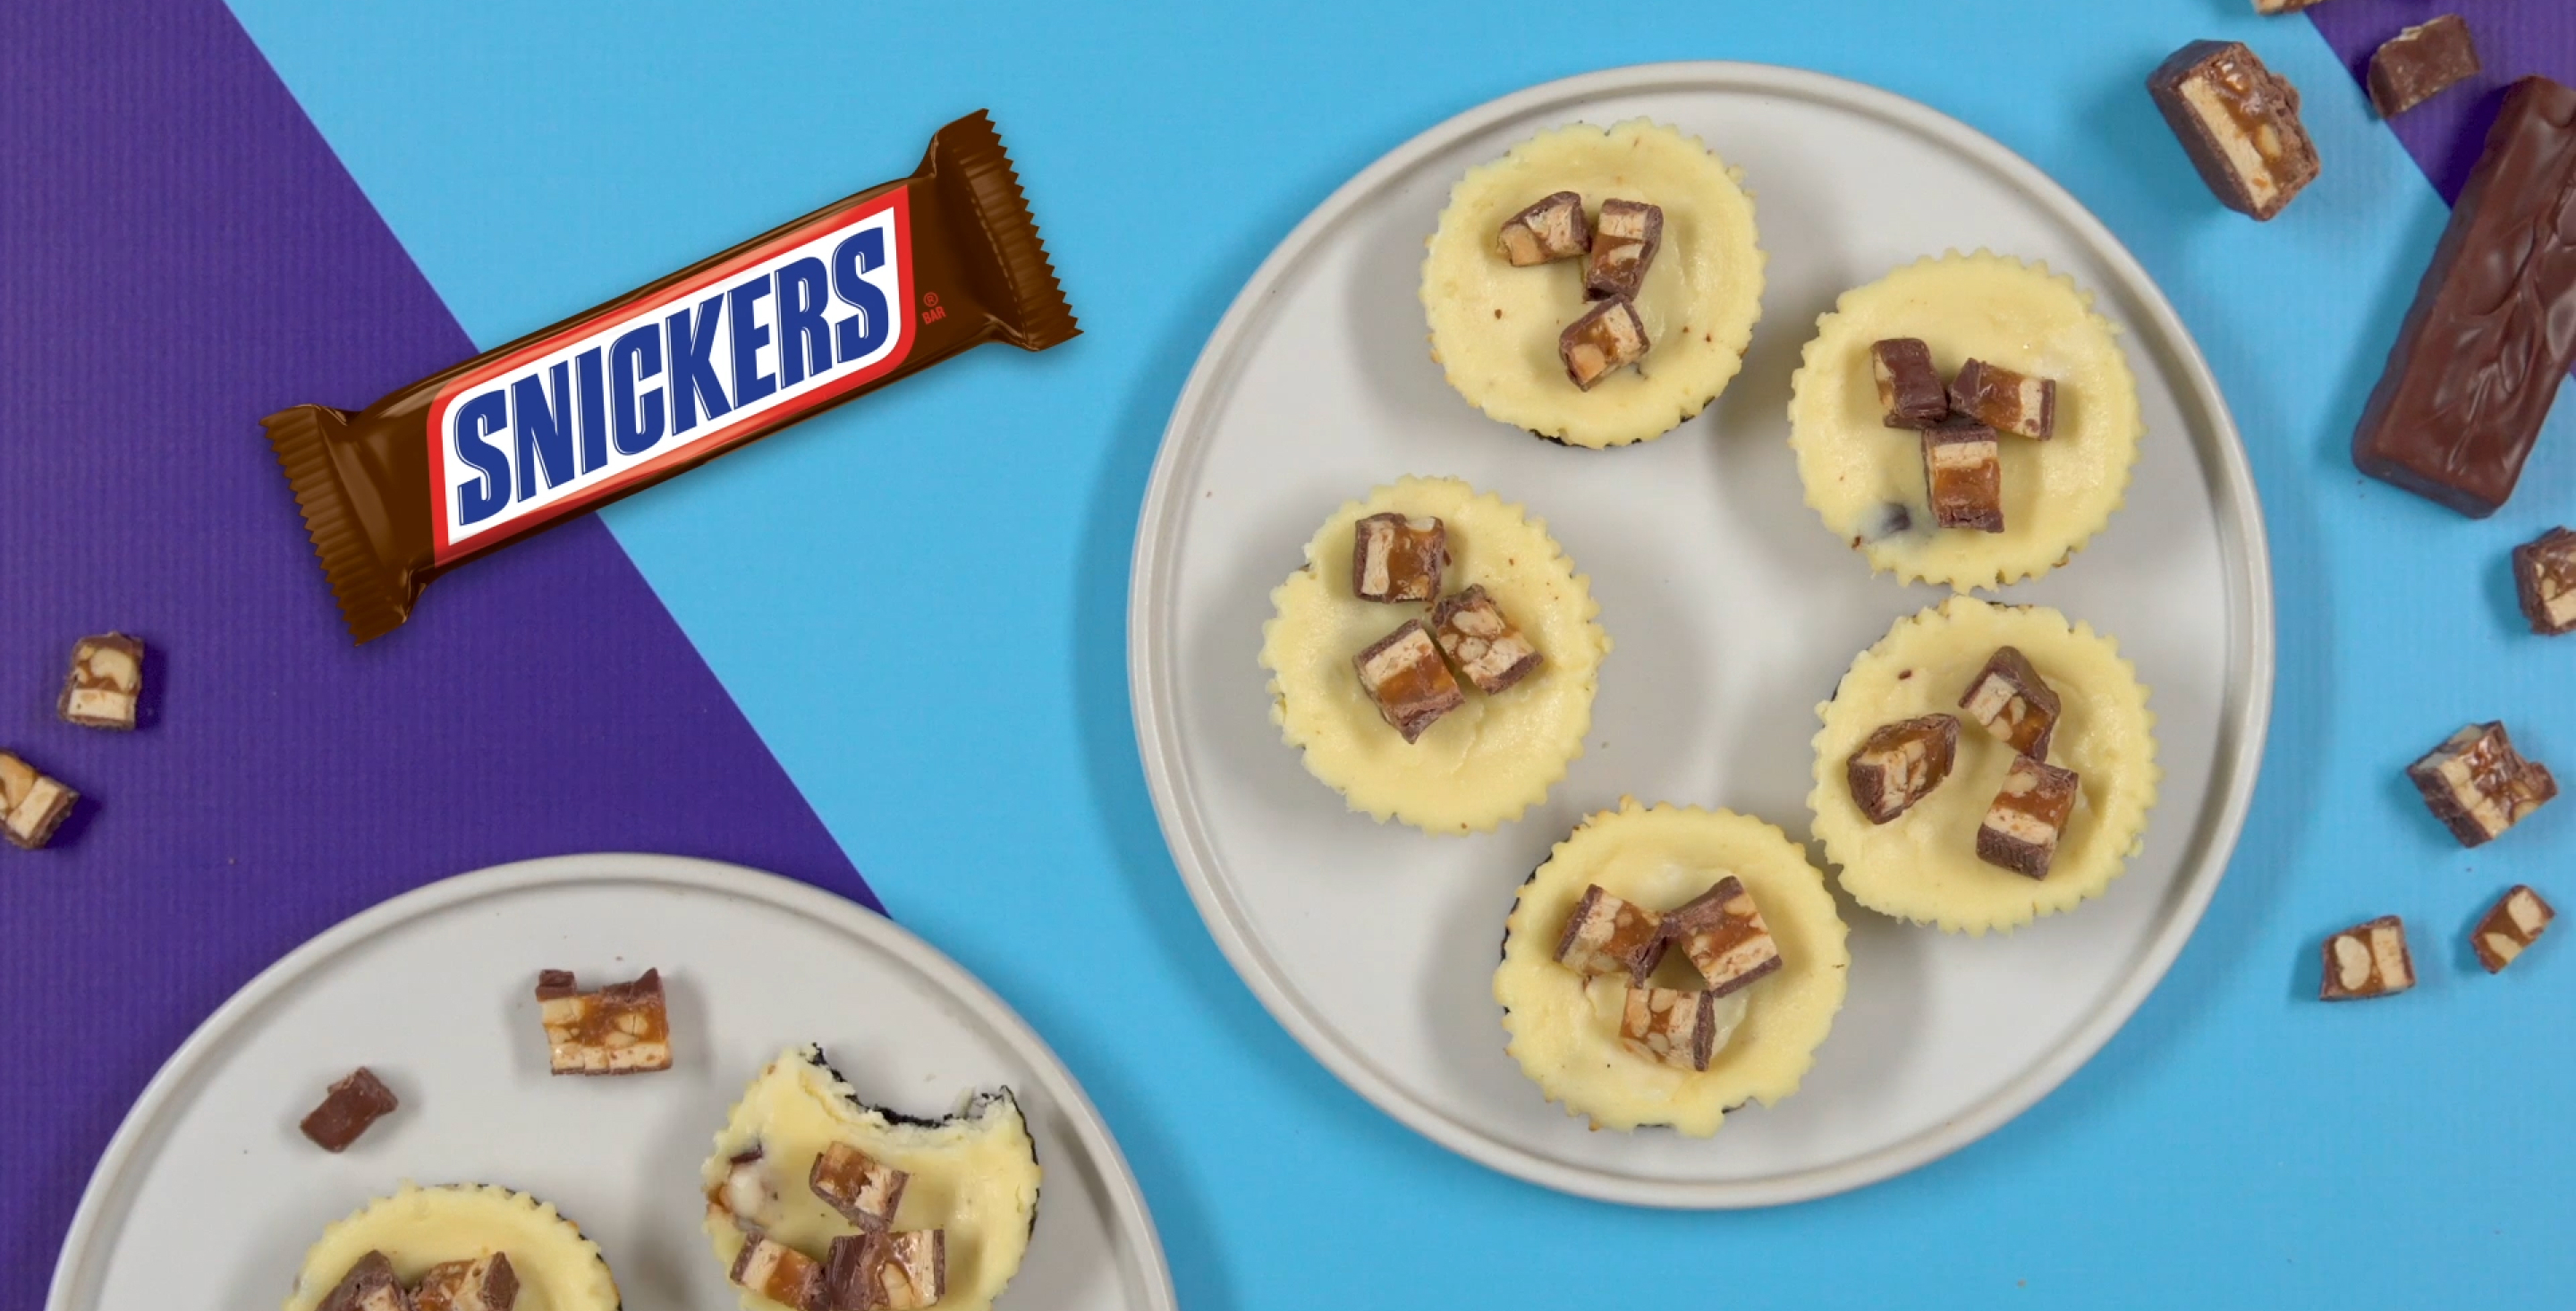 Birds eye view of Snickers cheesecake cups next to a classic snickers bar